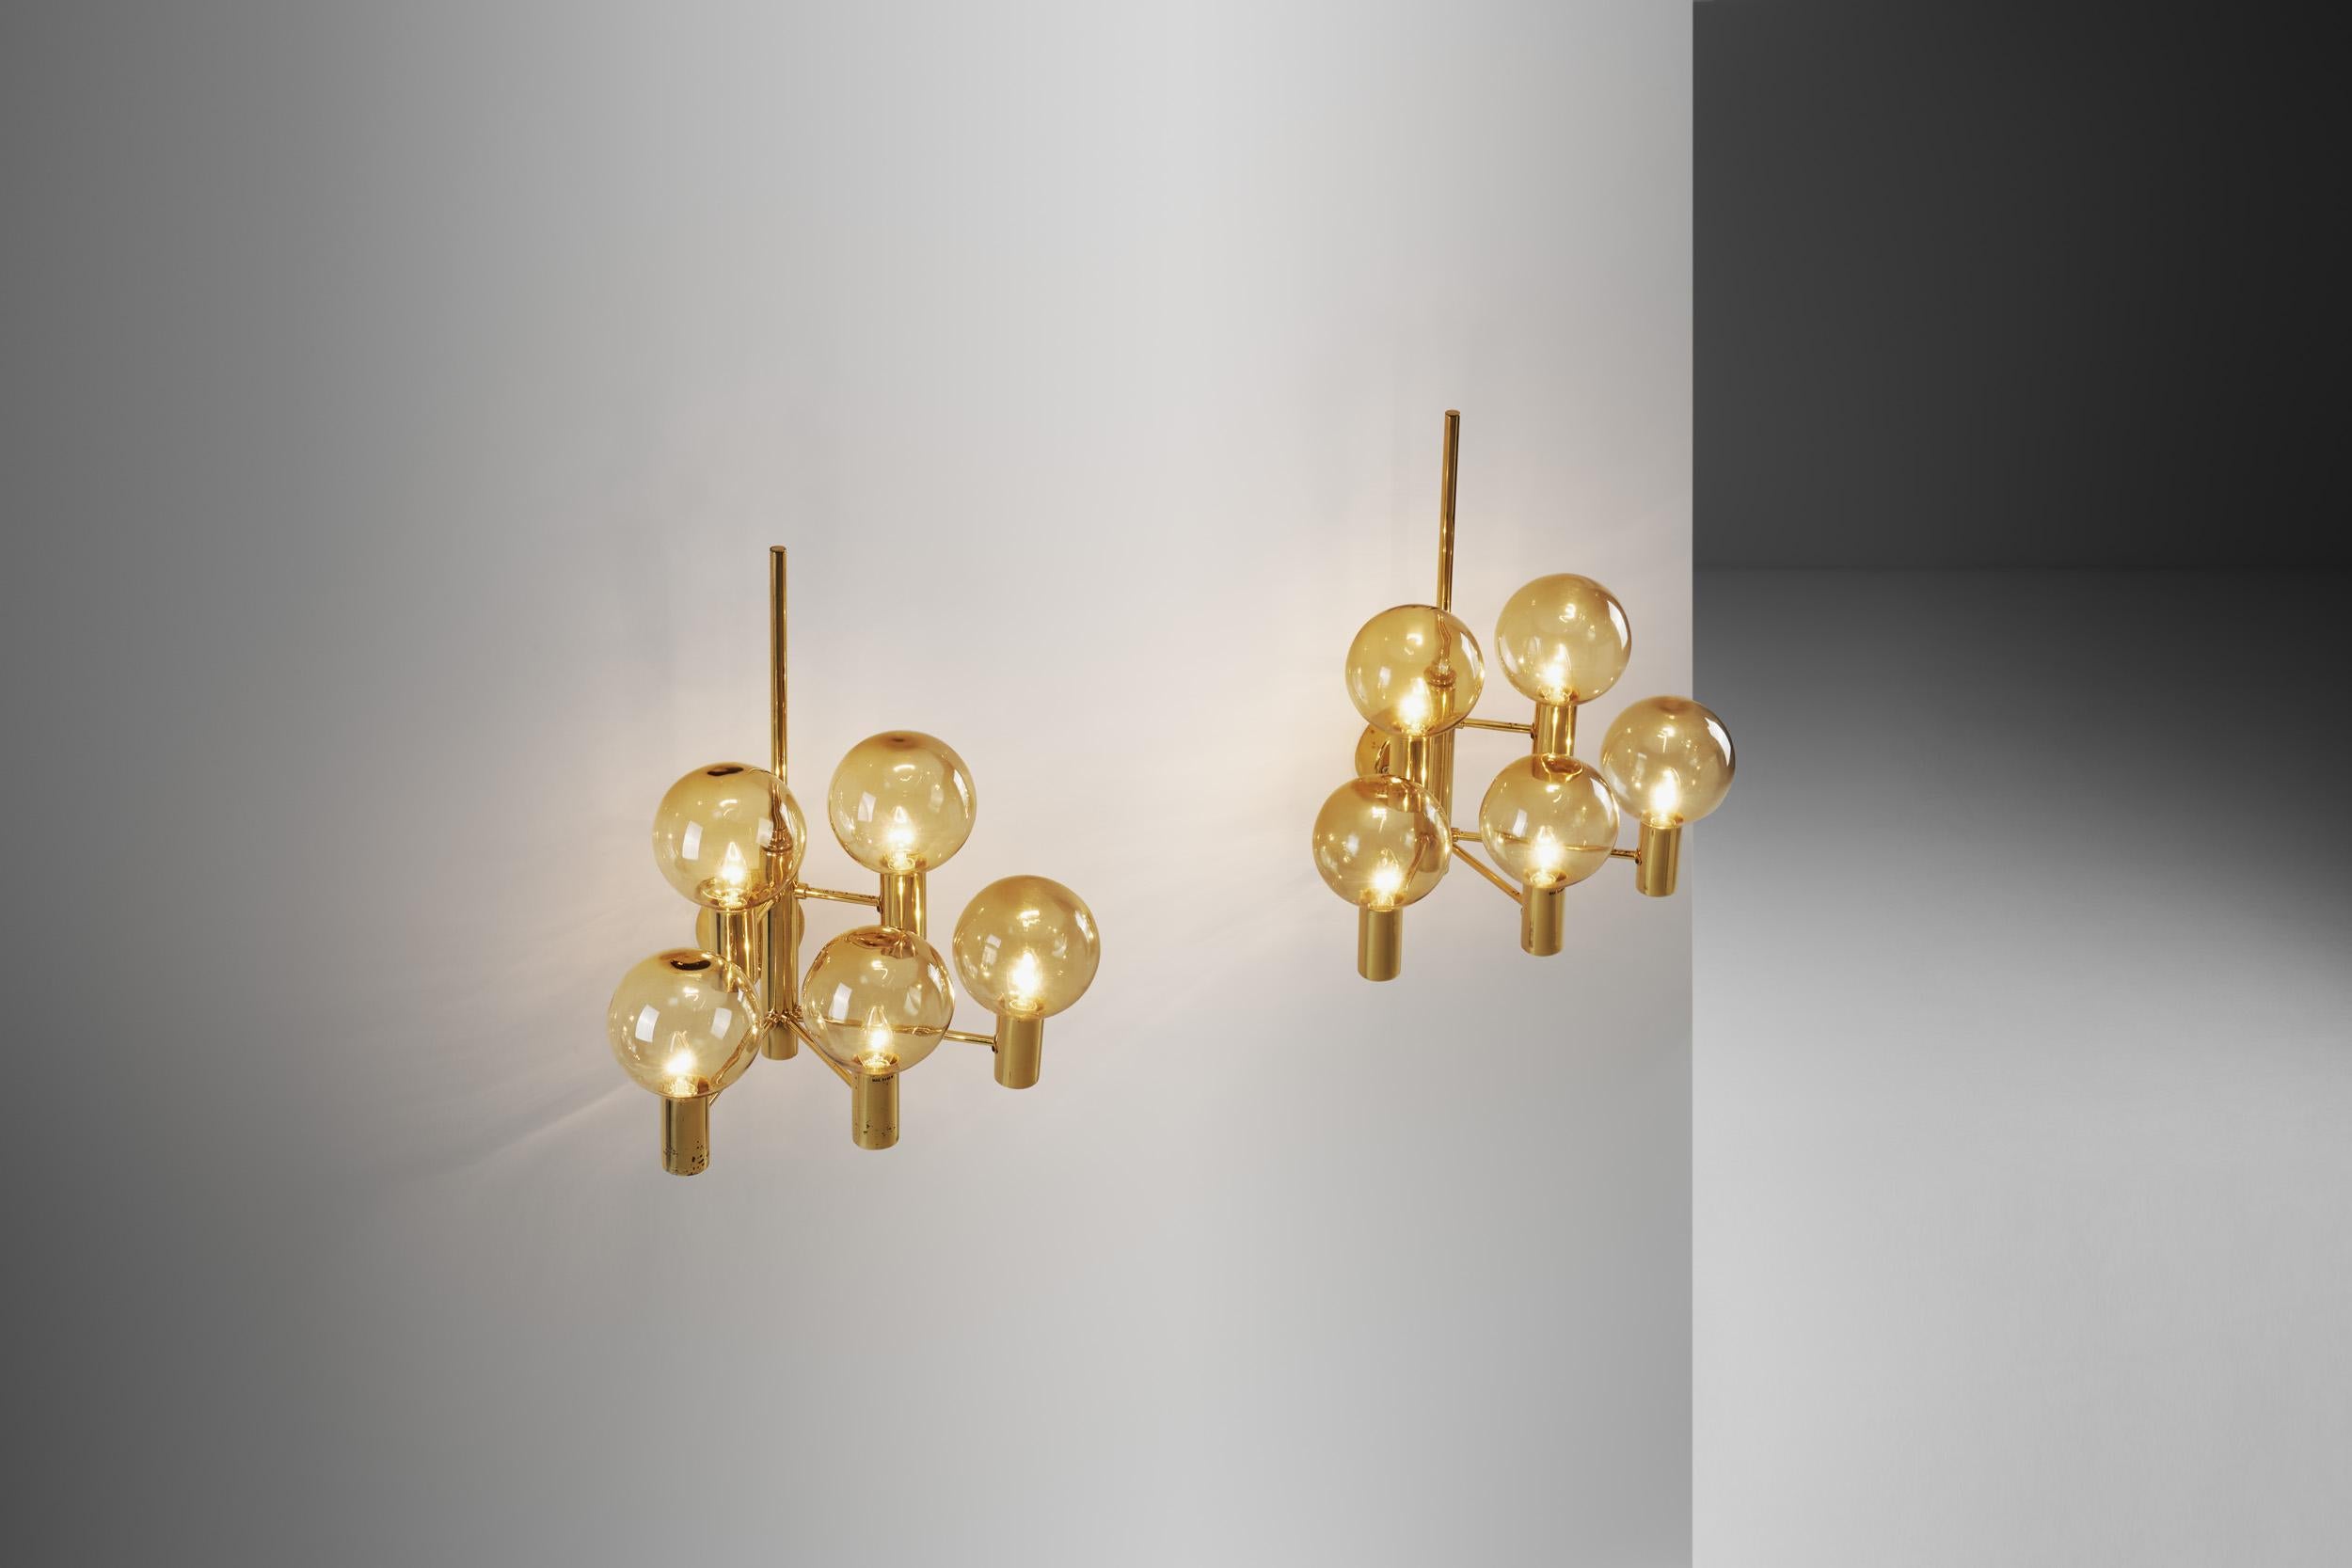 Scandinavian Modern Hans-Agne Jakobsson Brass Wall Lamps with Smoked Glass Shades, Sweden 1960s For Sale